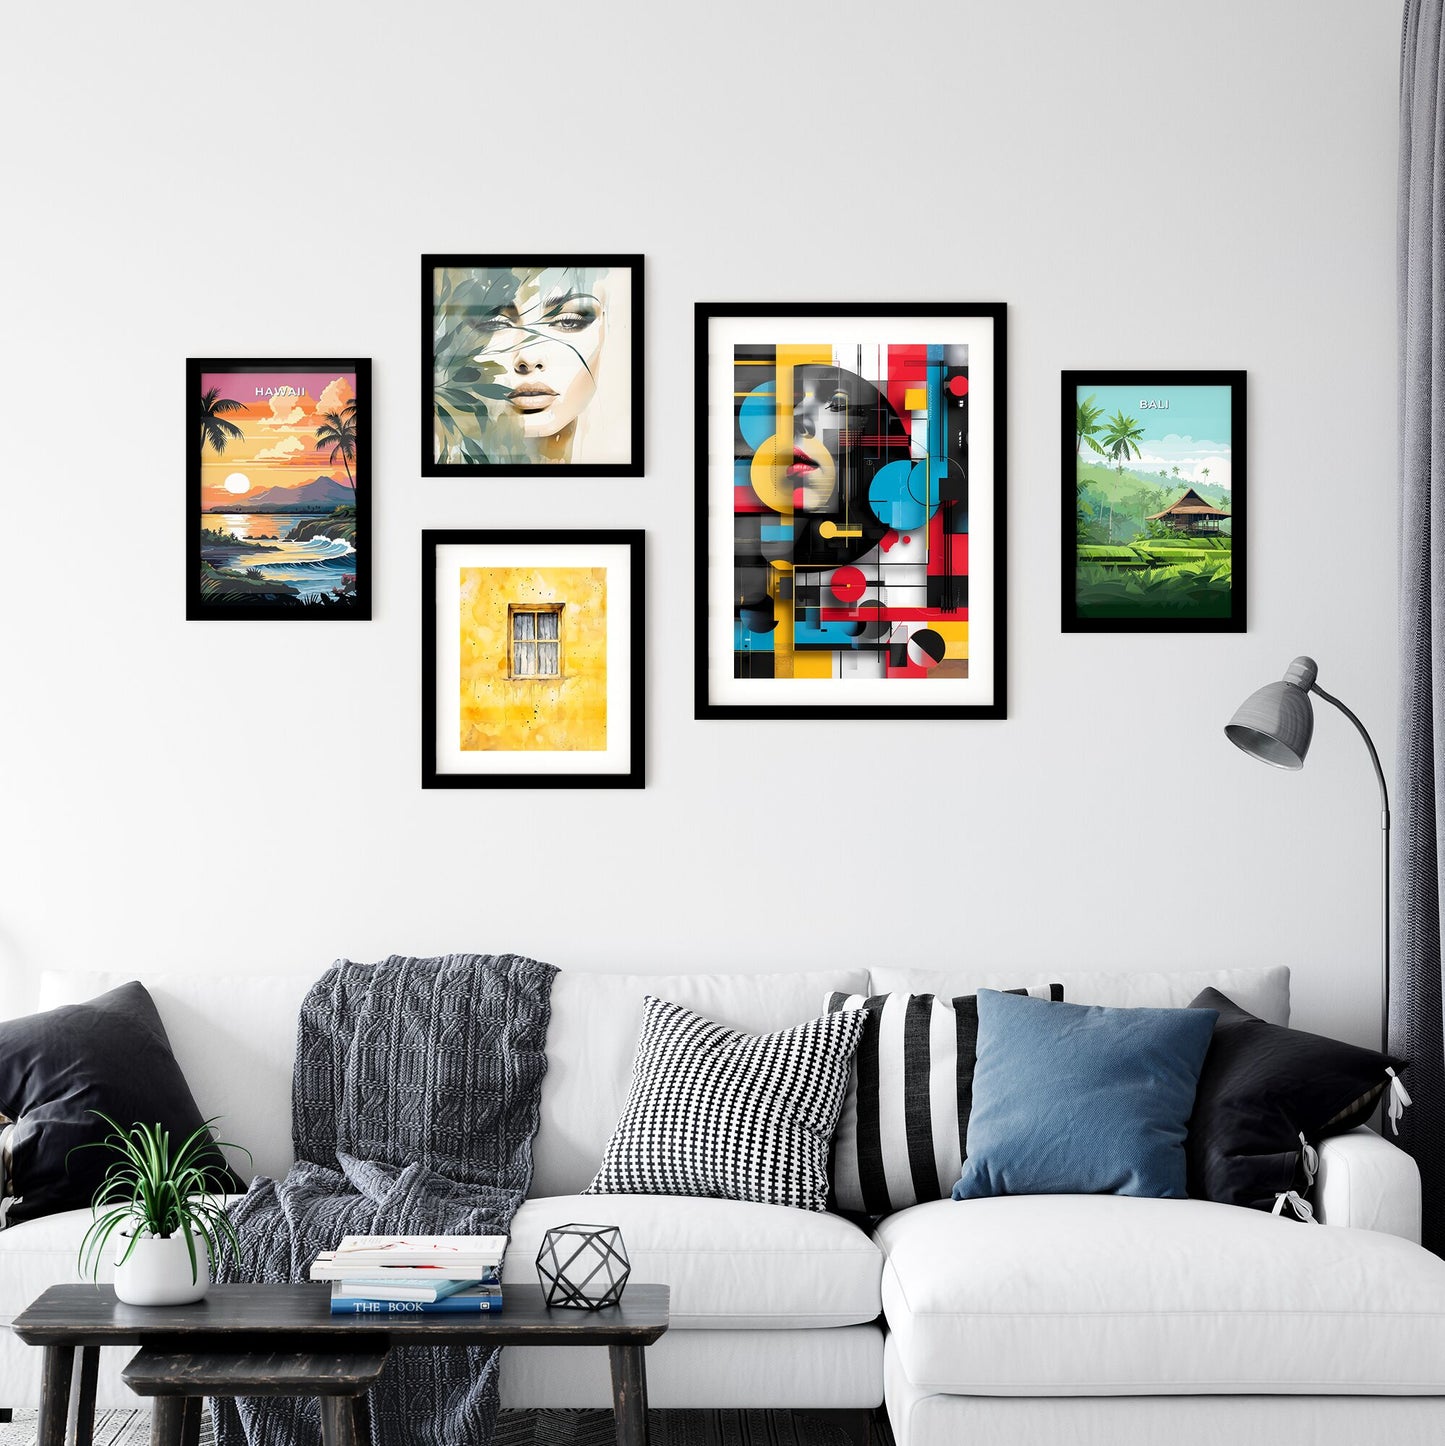 Vibrant Bauhaus Art - Colorful Painting Artwork with a Bold Abstract Composition Default Title